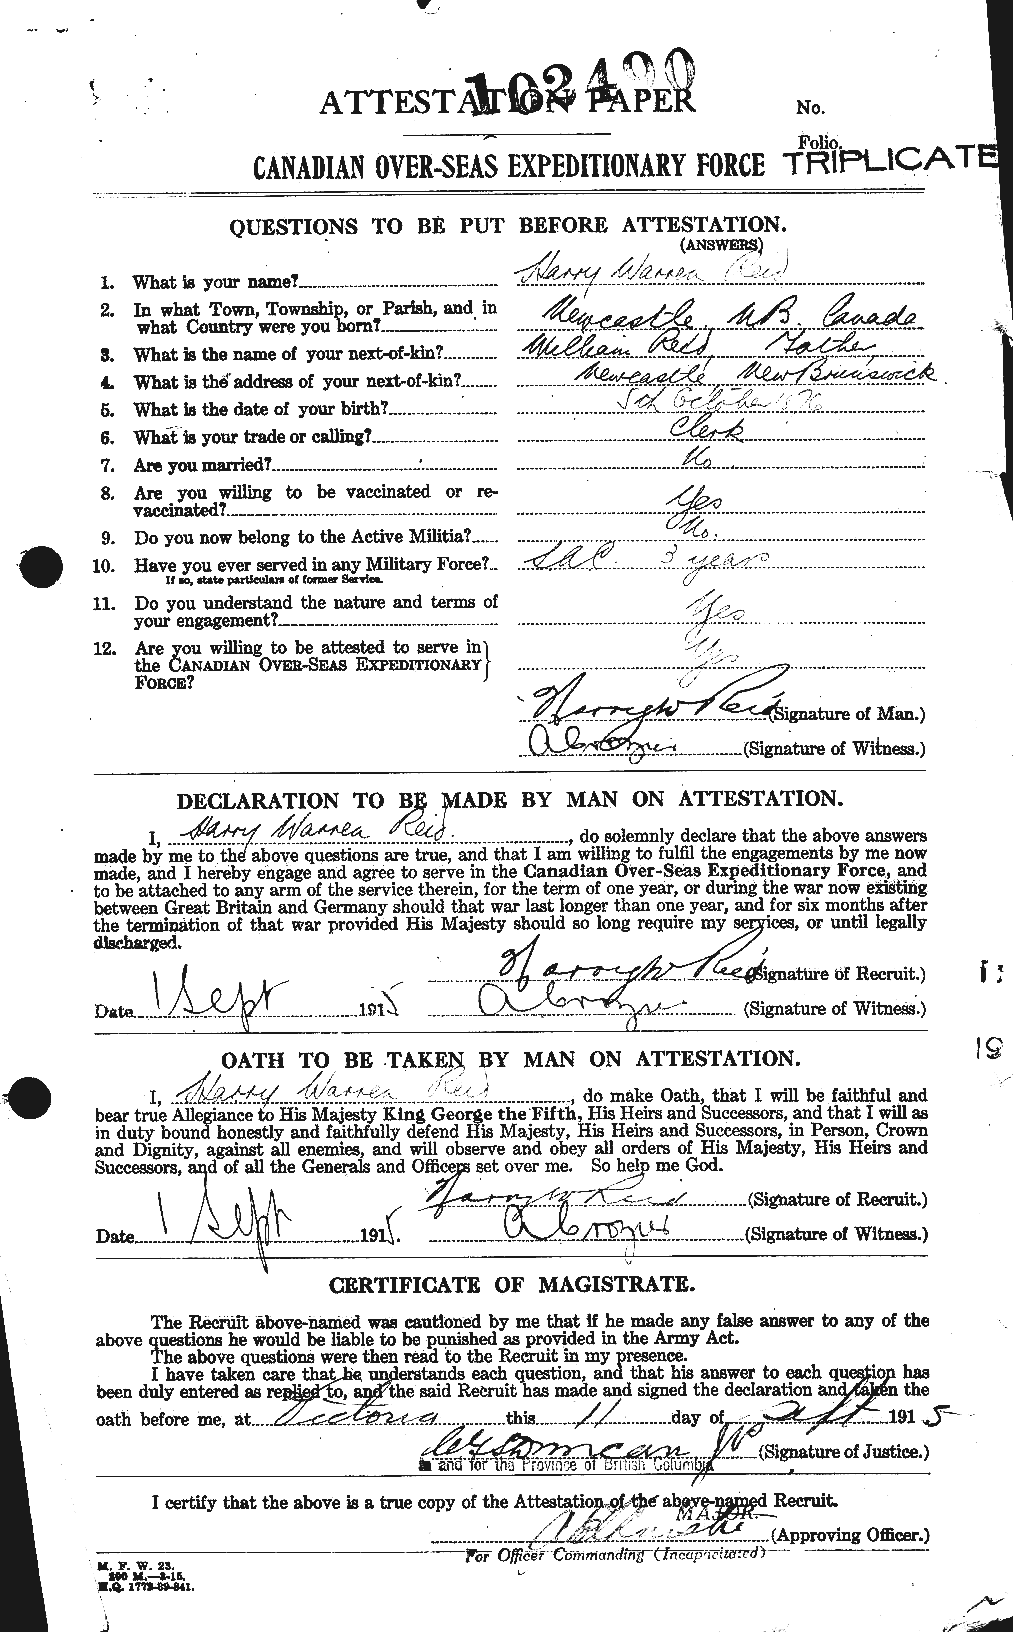 Personnel Records of the First World War - CEF 598589a